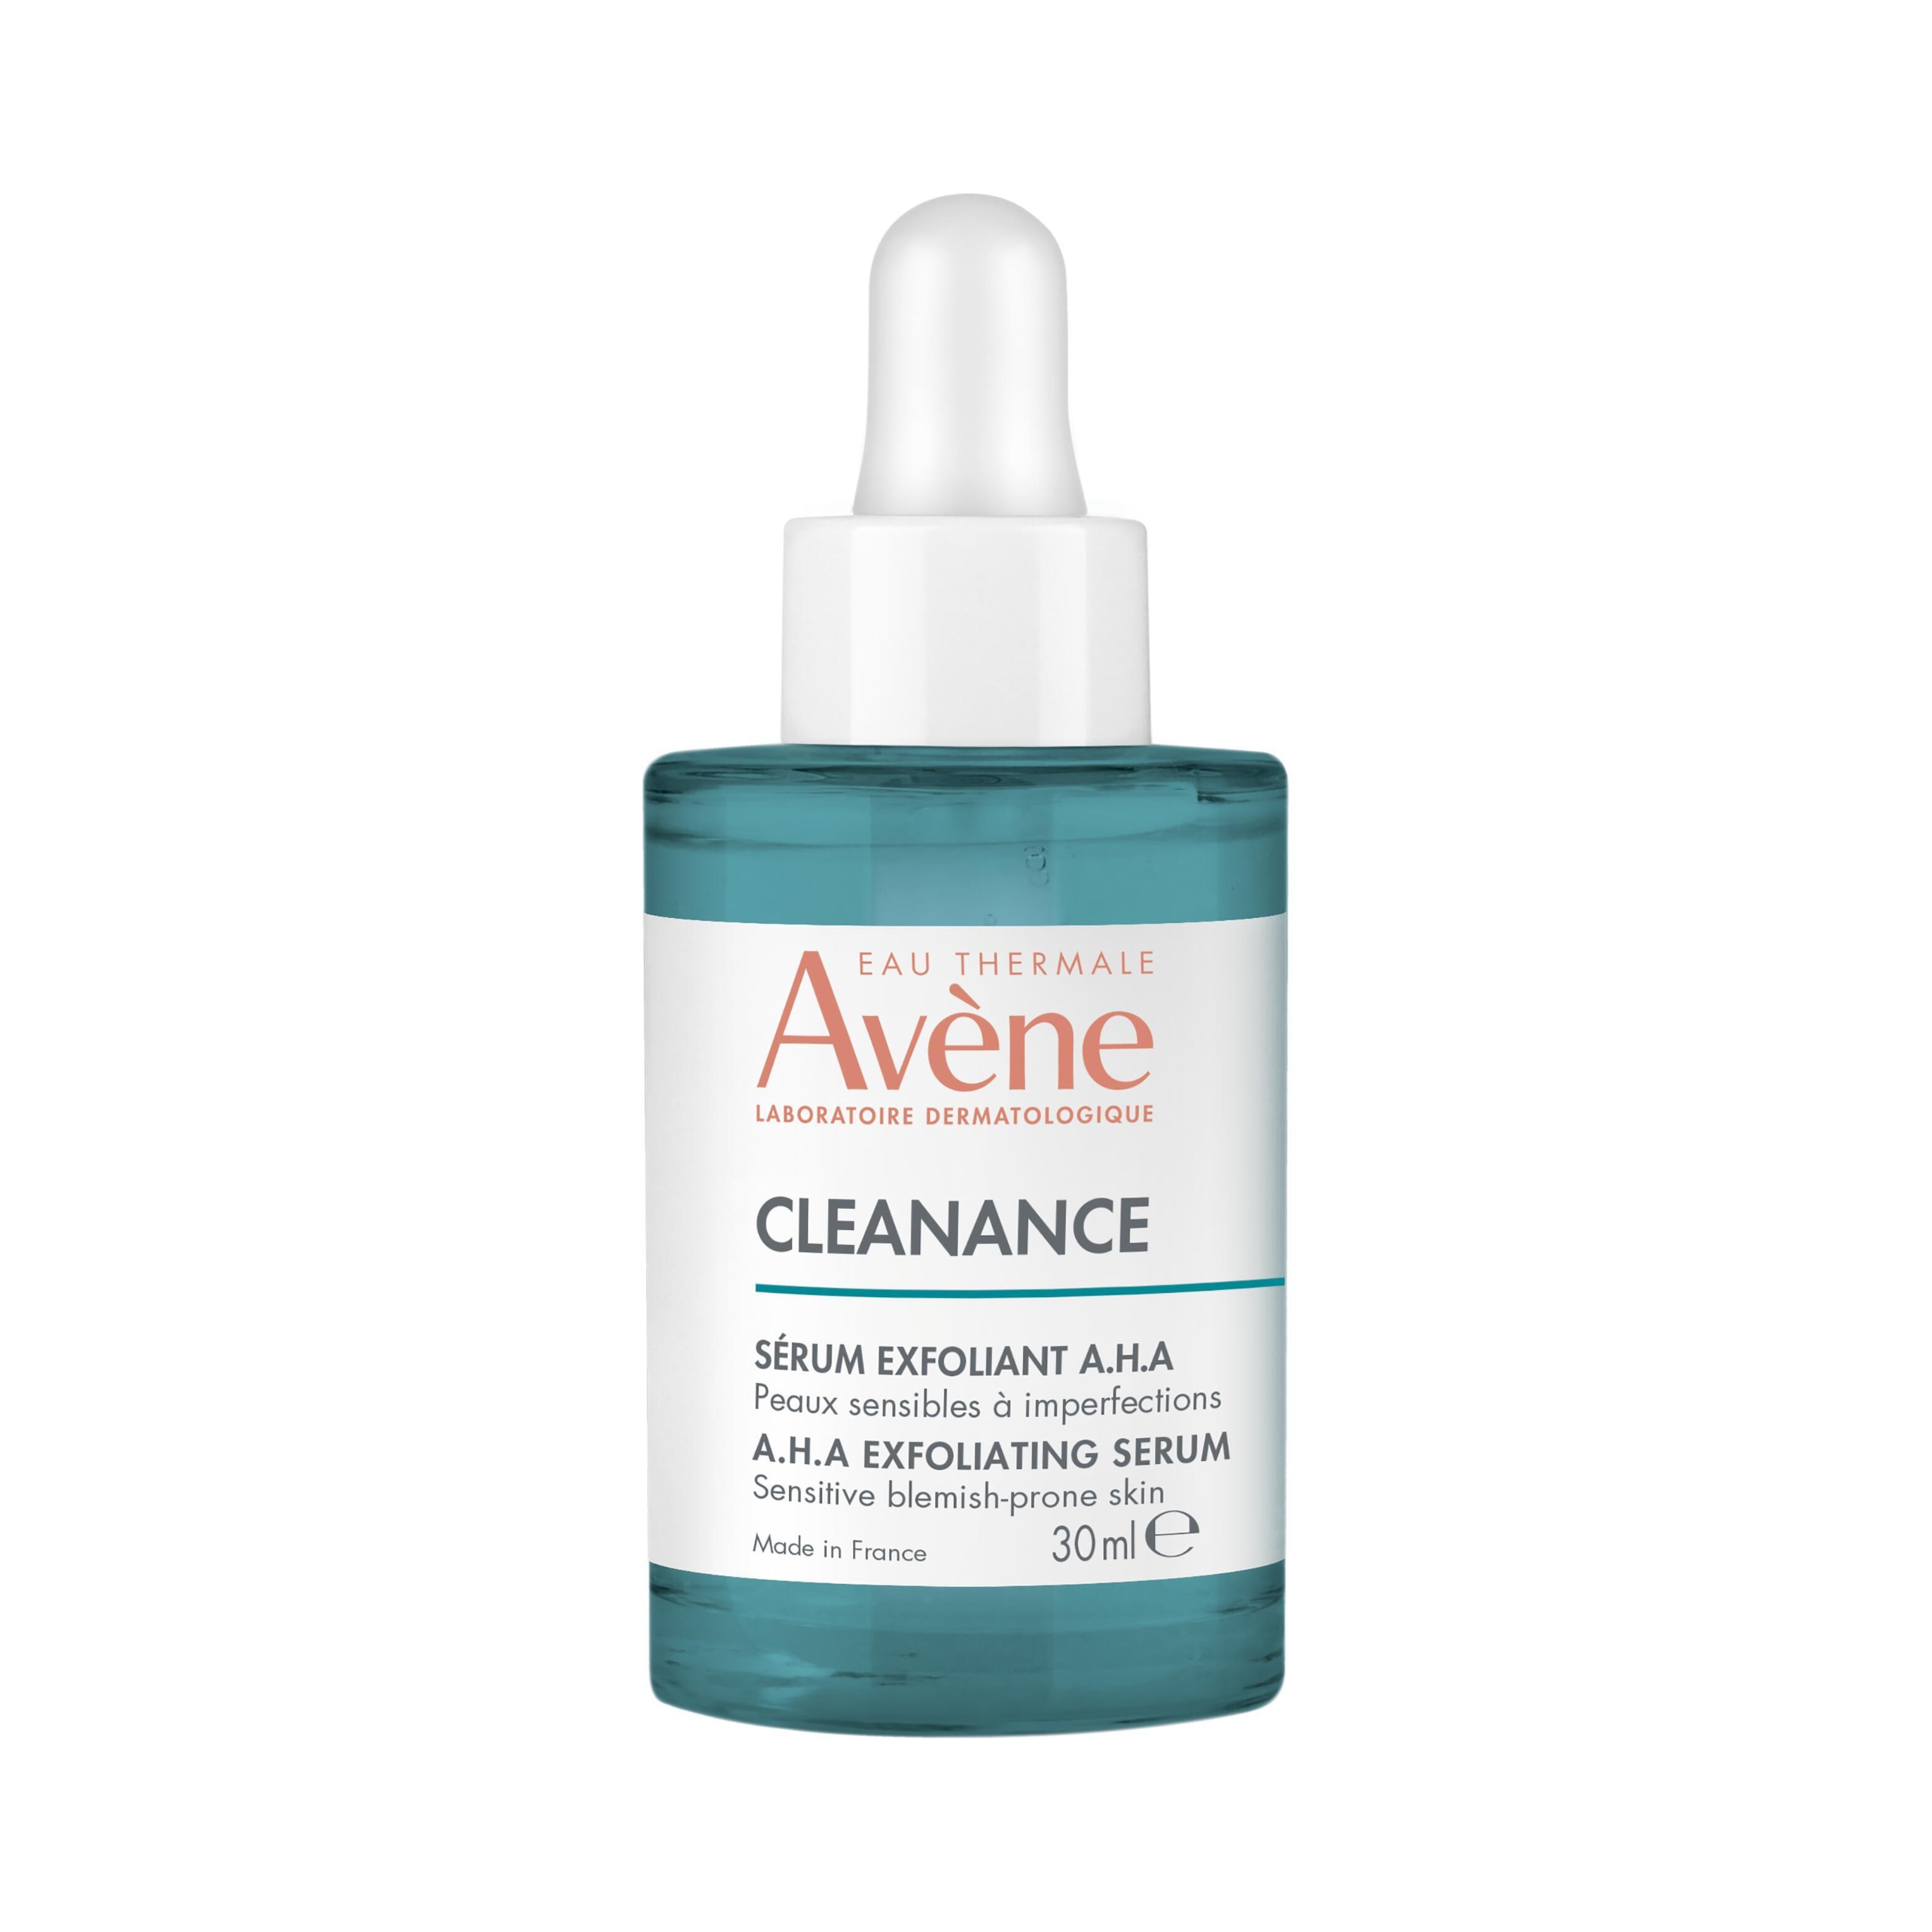 Avène - Cleanance A.H.A Exfoliating Serum 30ml – The French